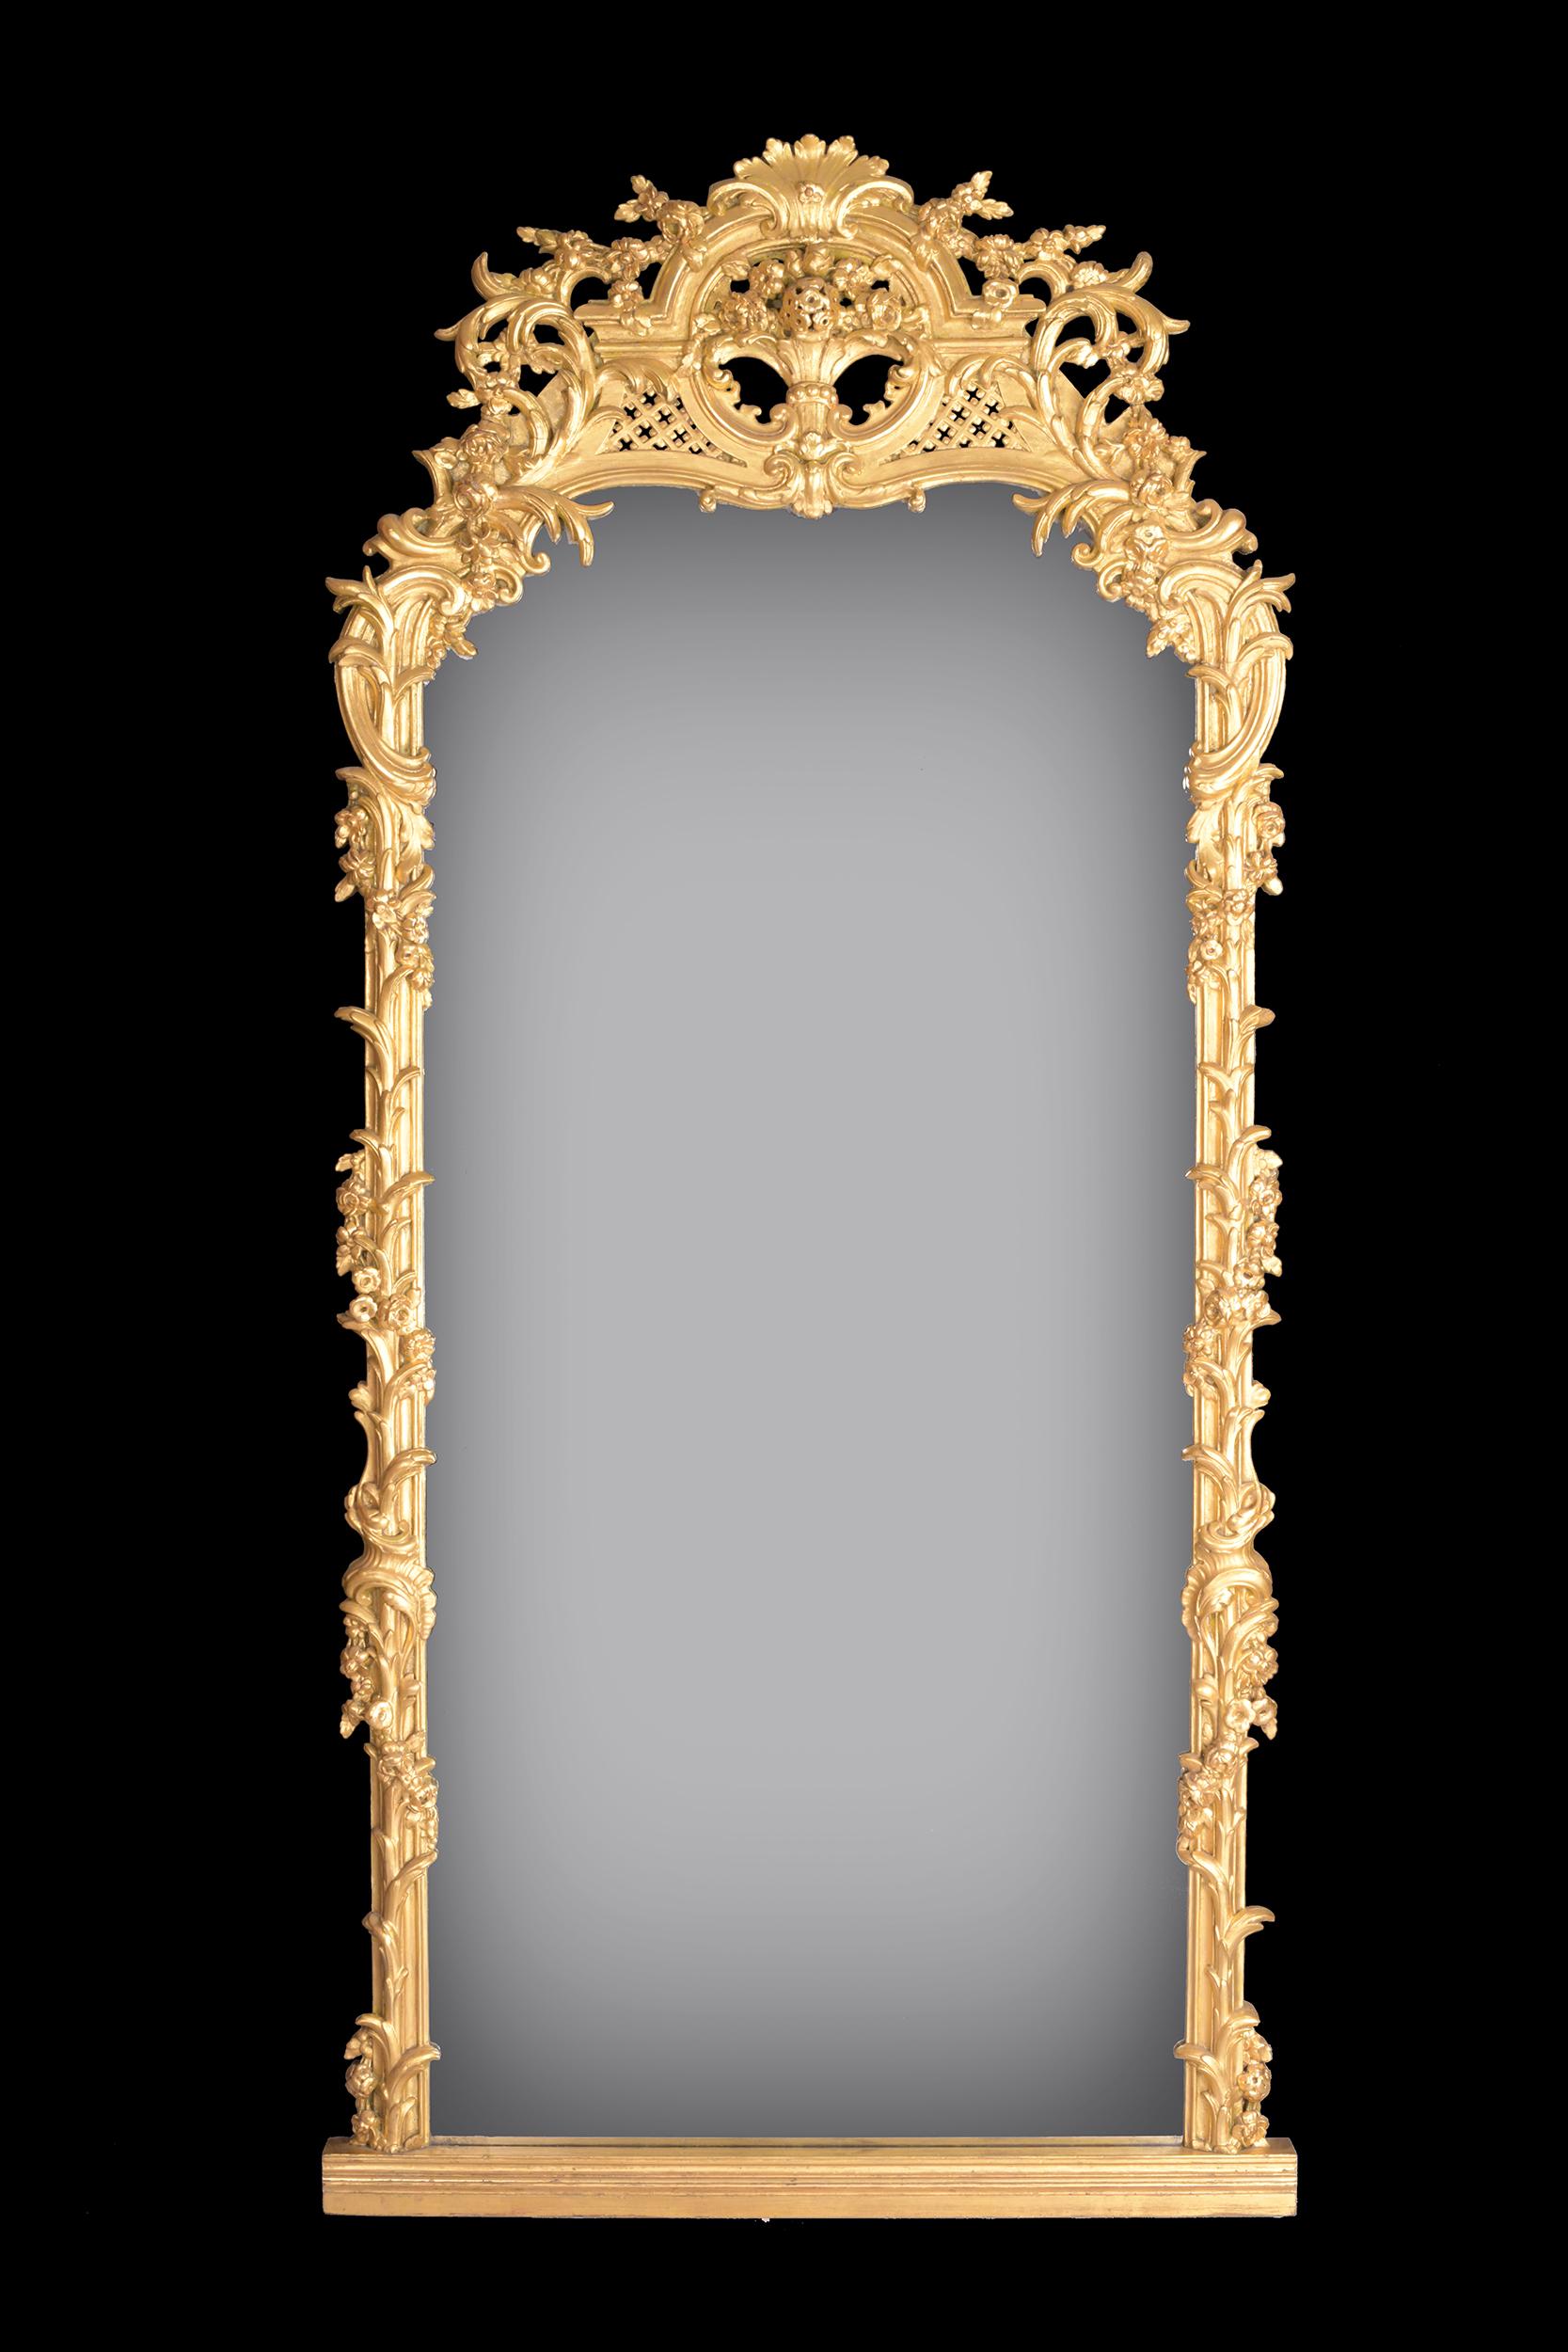 A very fine large and attractive gilt mirror of arched rectangular form within an elaborate leaf and scroll work surround, surmounted with scrollwork and central shell raised on a platform.

Circa 1880

English.

  